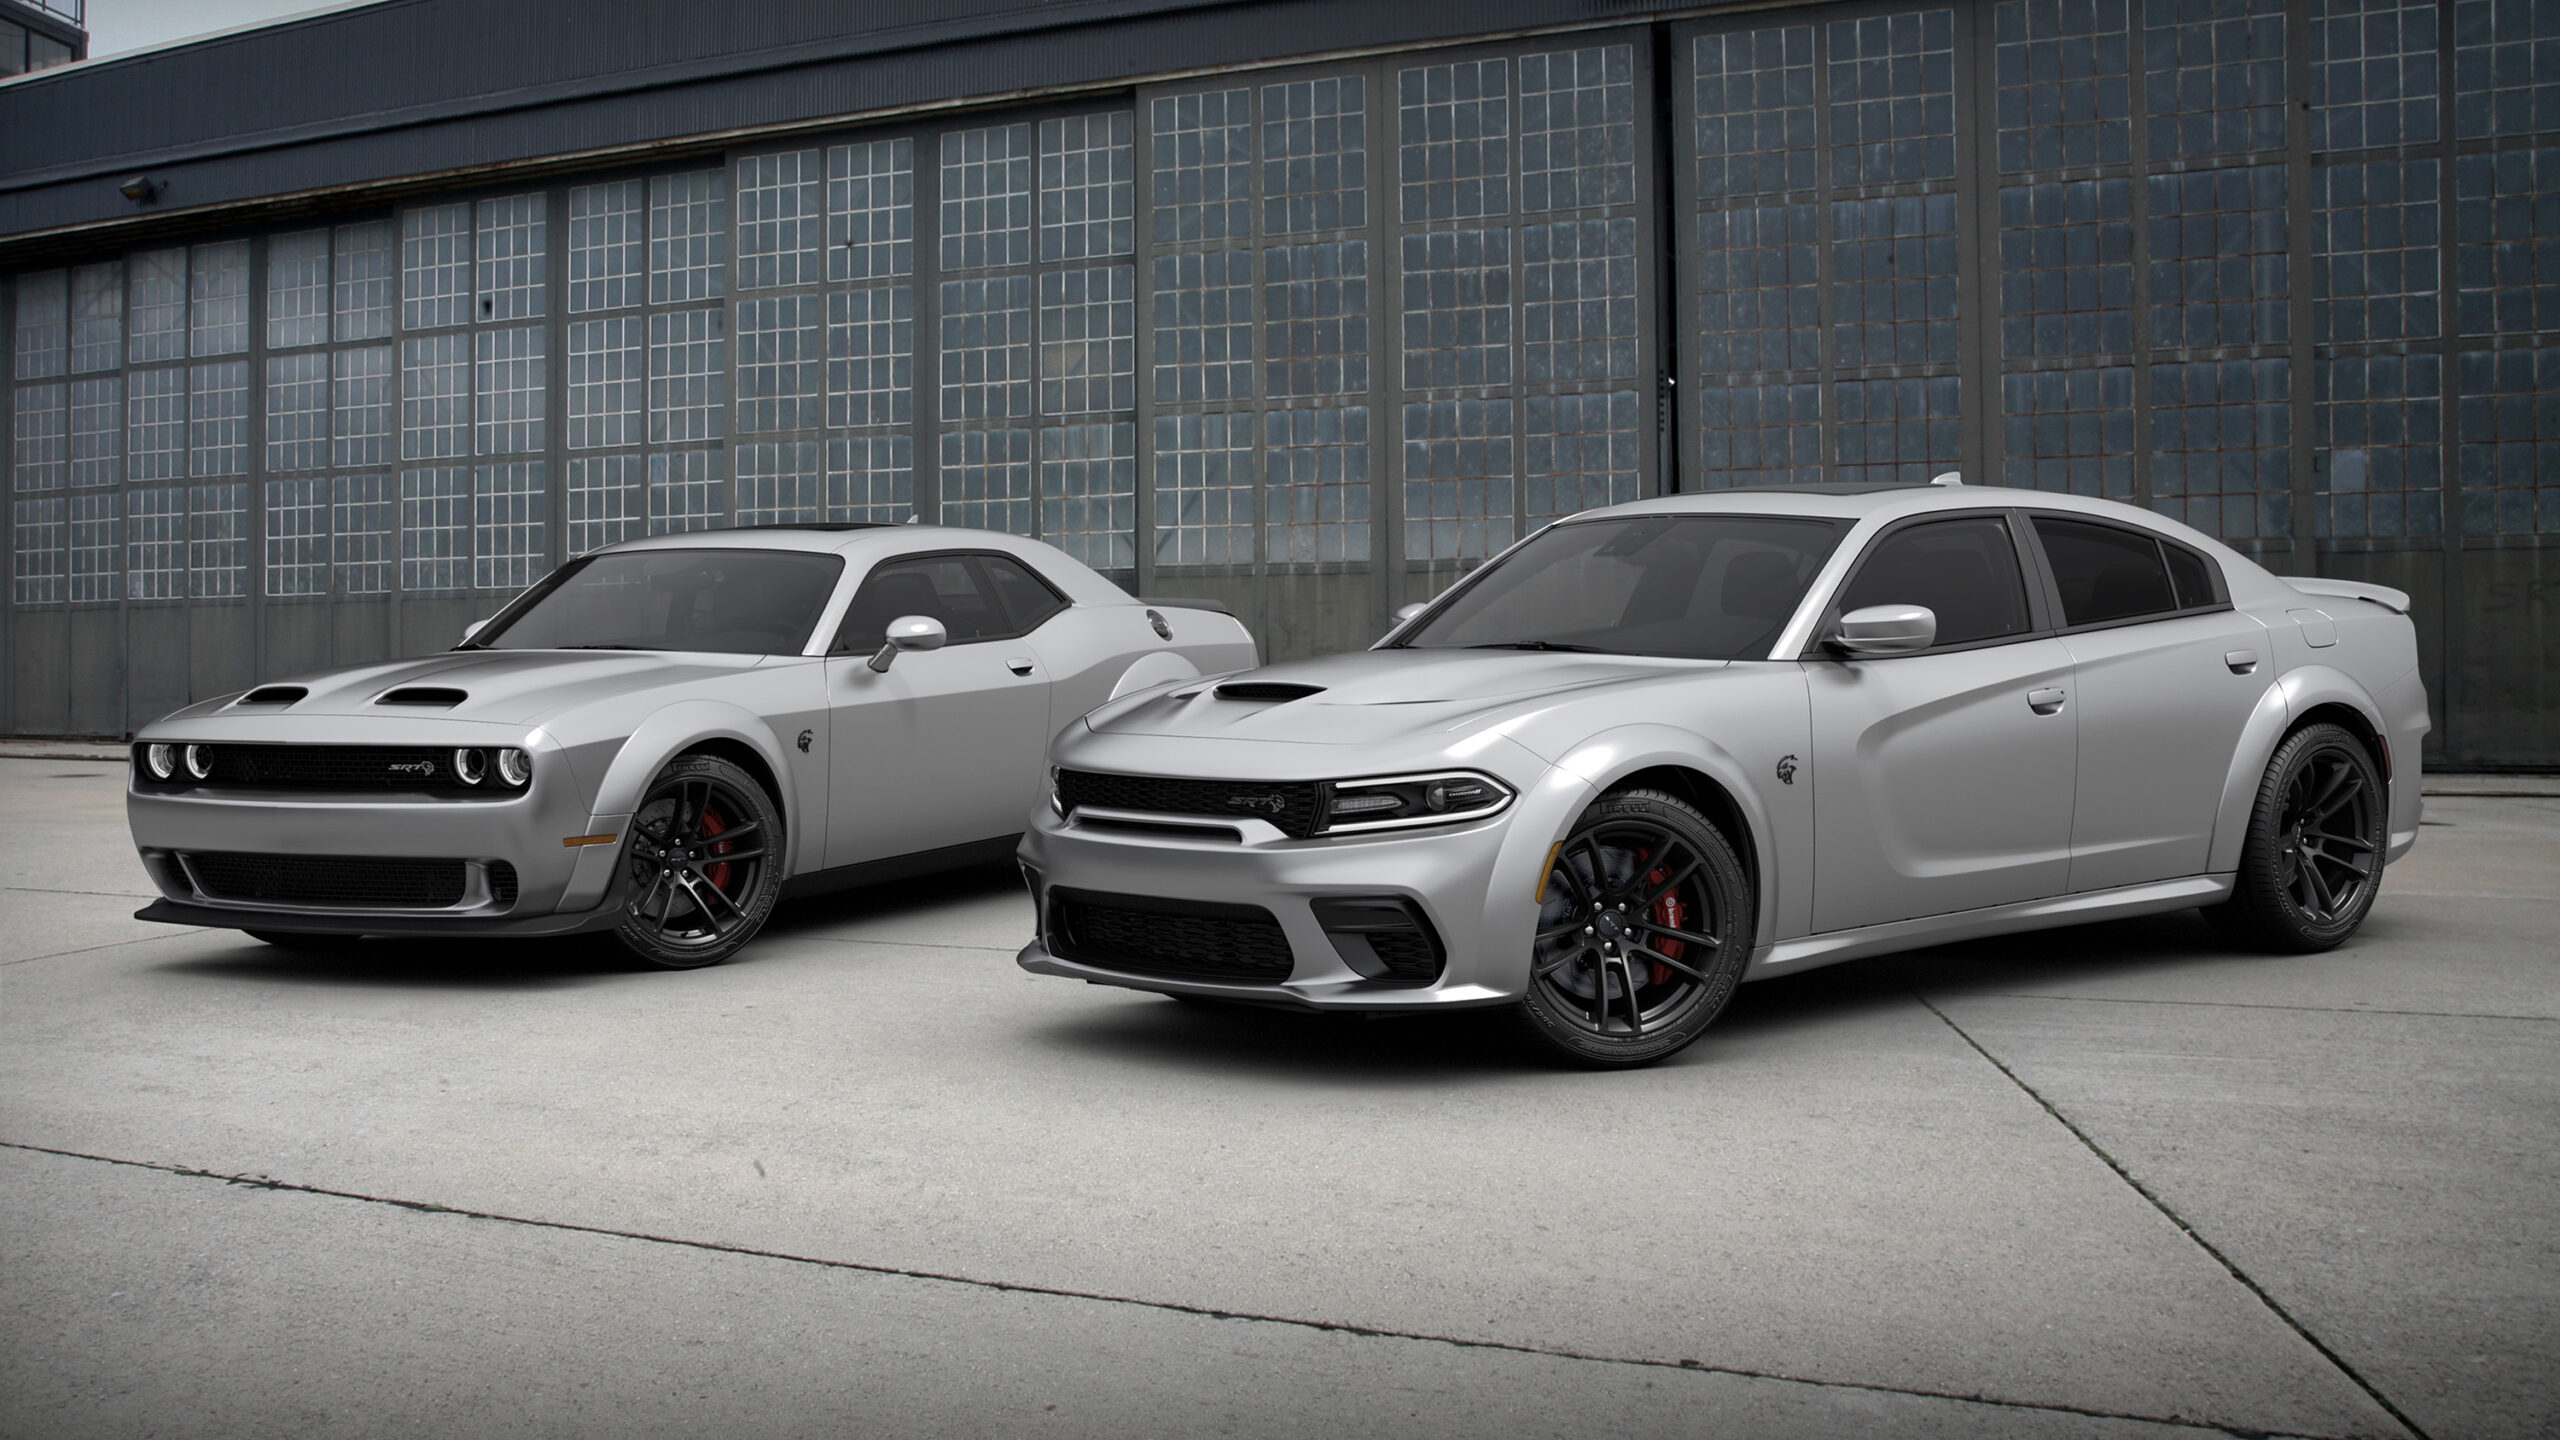 It's A "Smoke Show", As Dodge Introduces A New Color For Charger